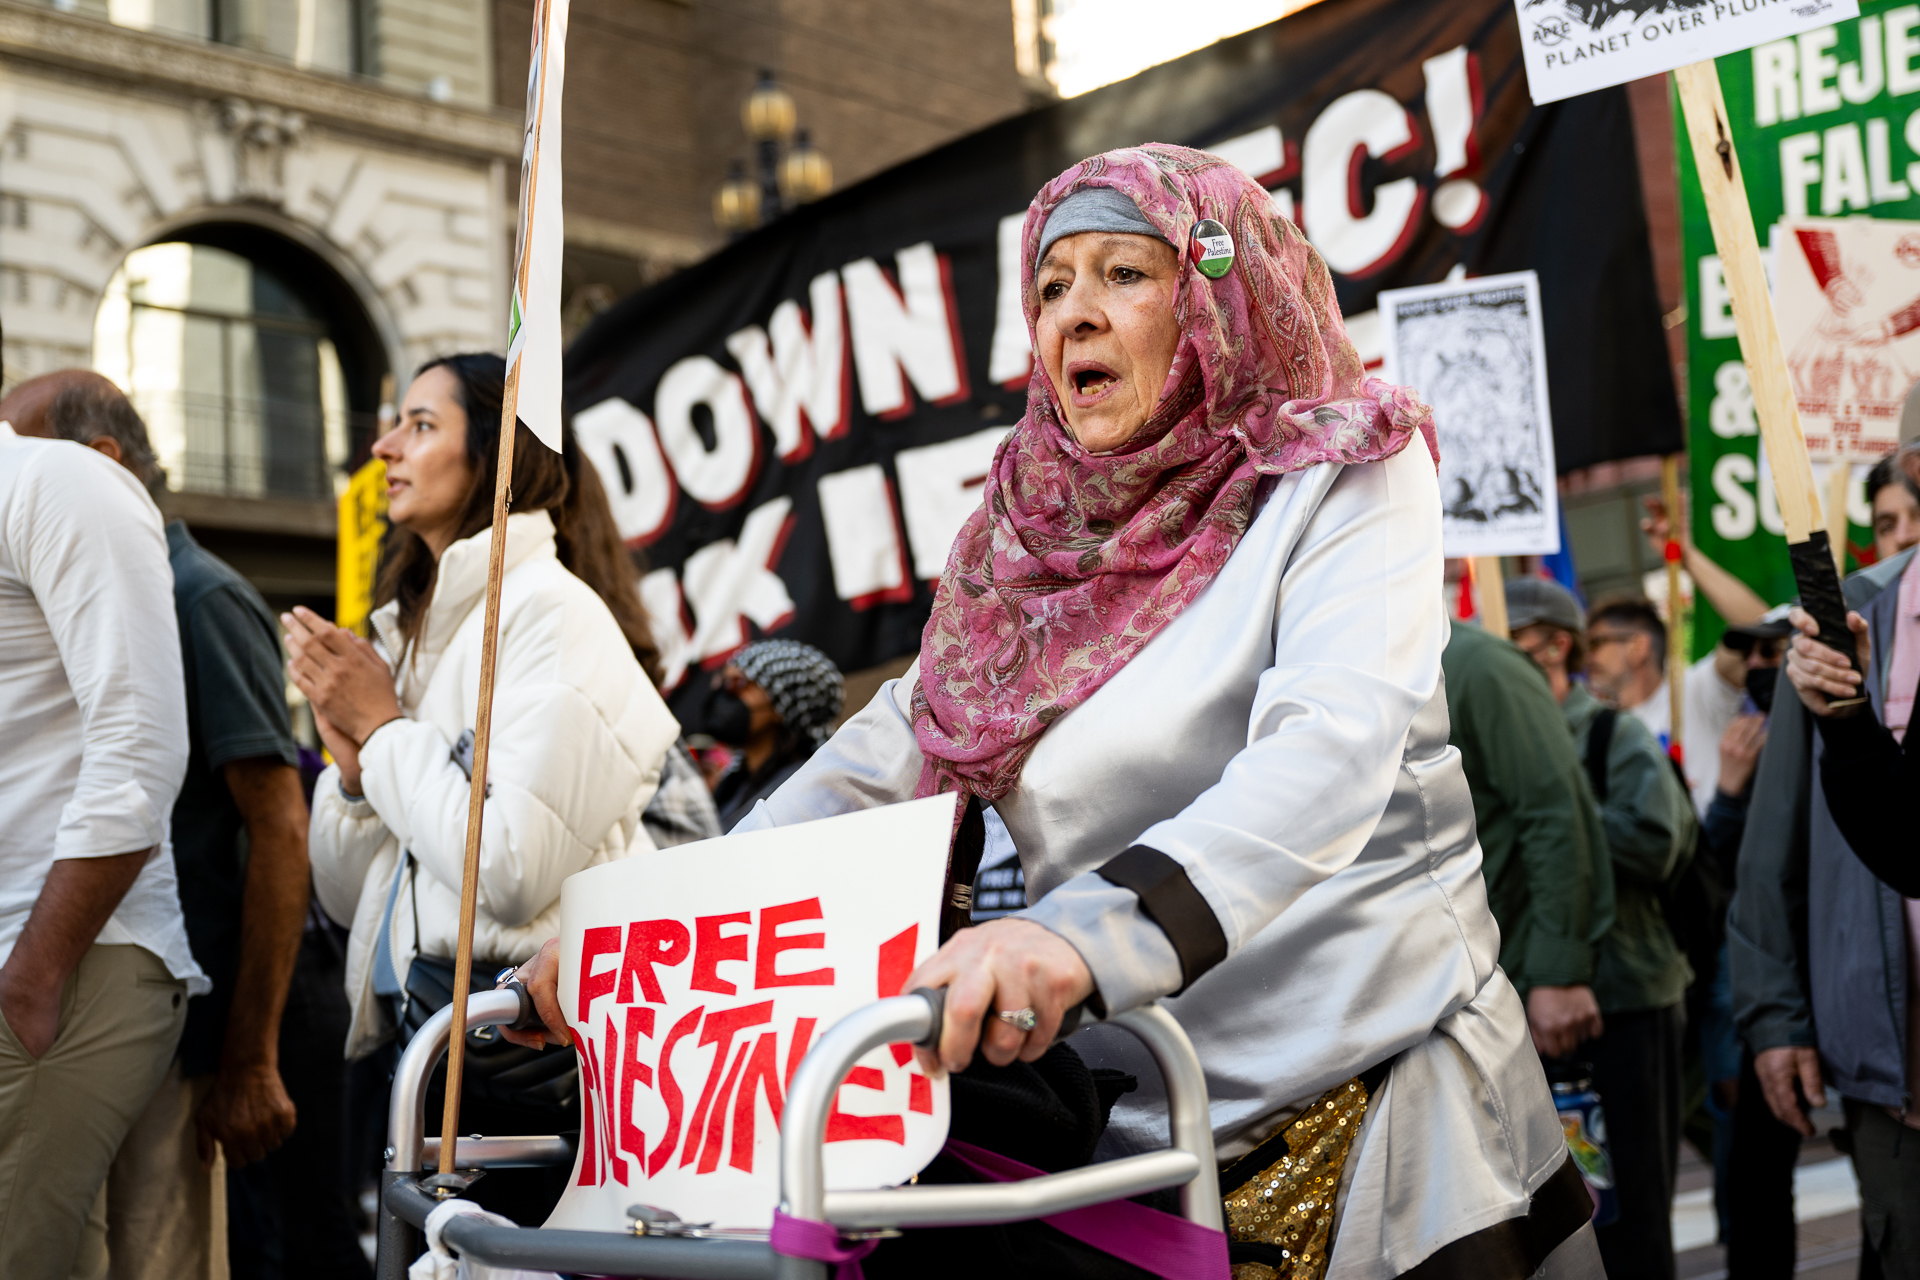 An older woman uses a walker with a sign that says "free Palestine" in a large crowd.